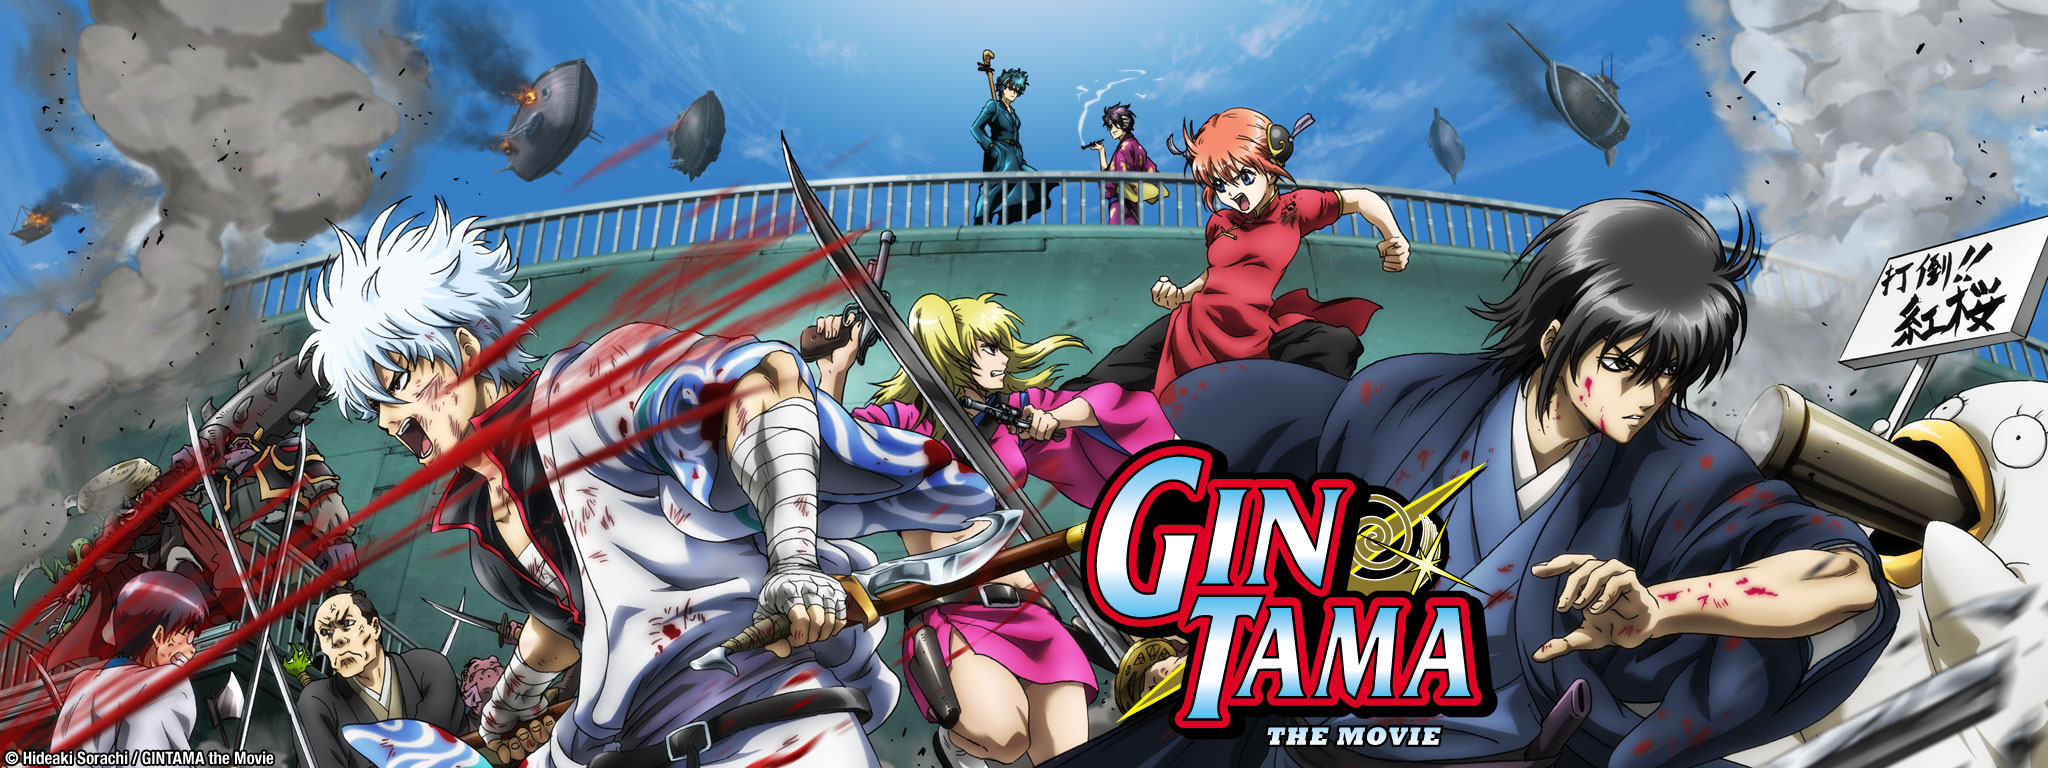 Title Art for Gintama The Motion Picture